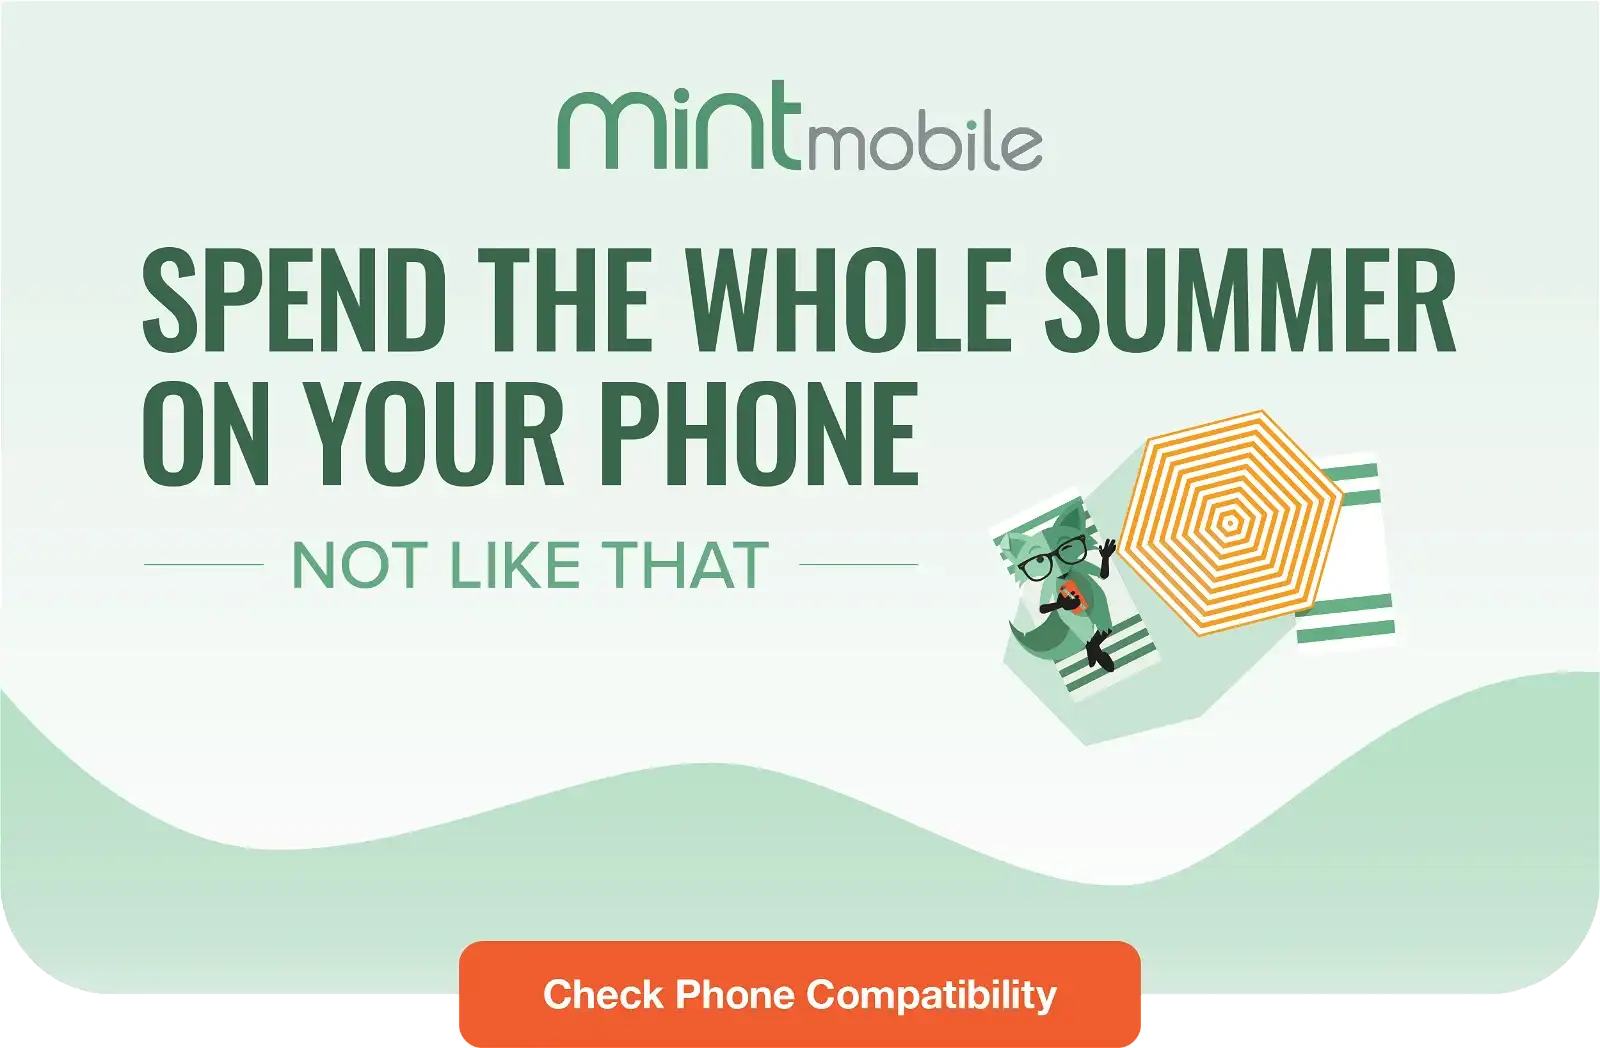 Spend the whole summer on your phone - Not like that